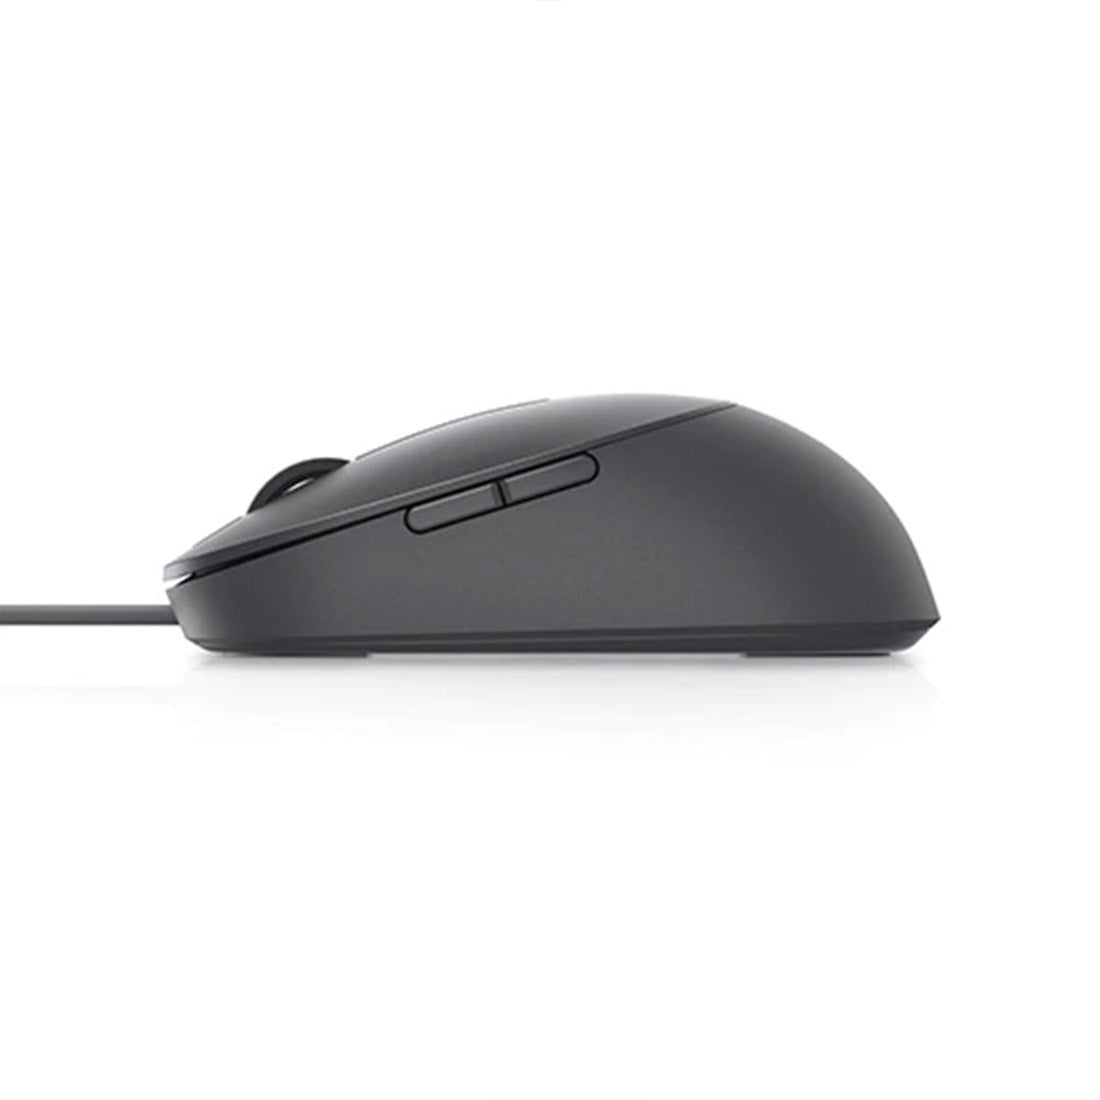 Dell MS3220 Laser Wired Mouse with Ambidextrous design and two Programmable Buttons